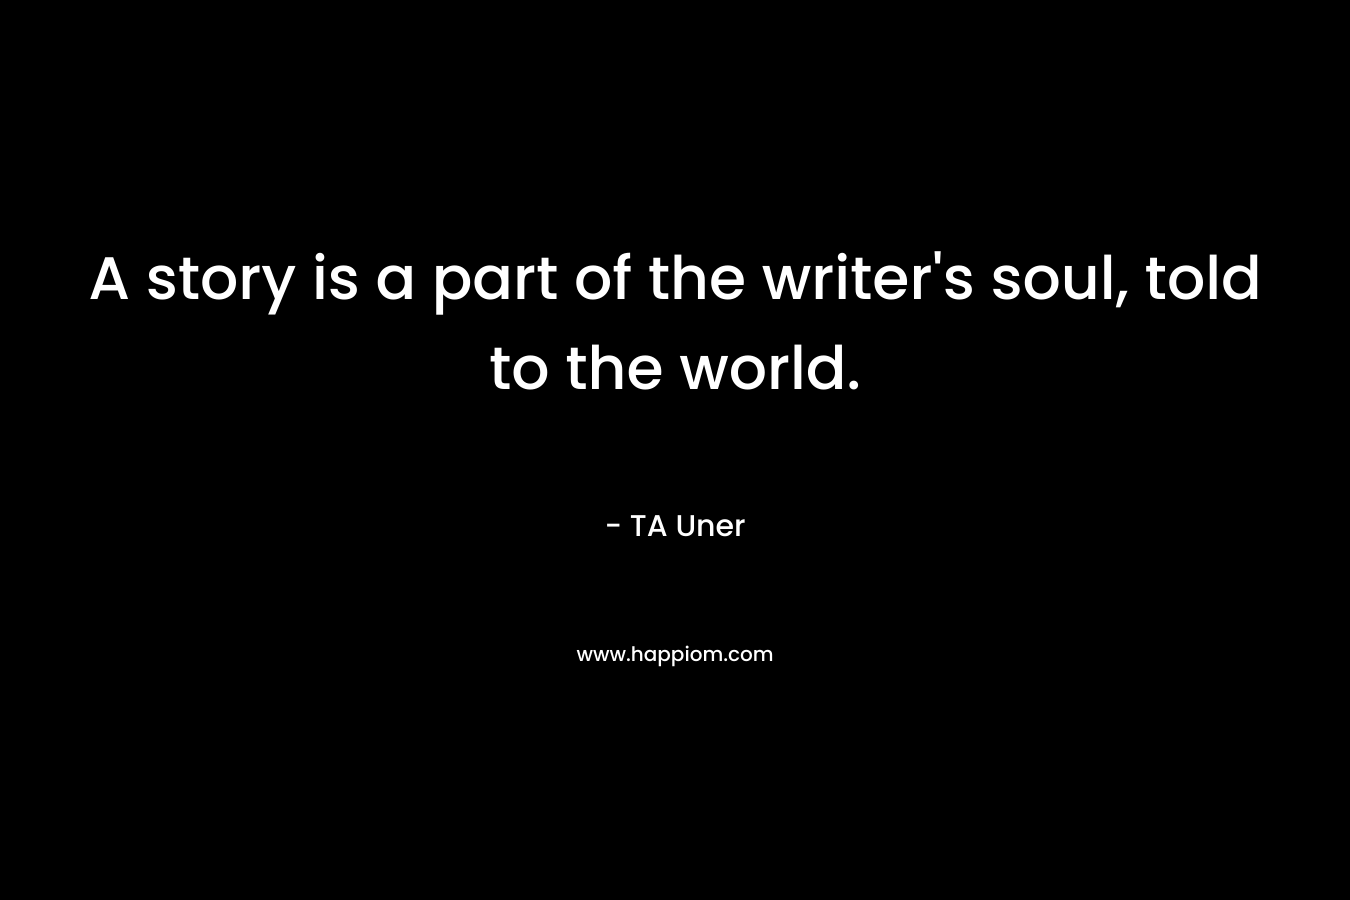 A story is a part of the writer’s soul, told to the world. – TA Uner